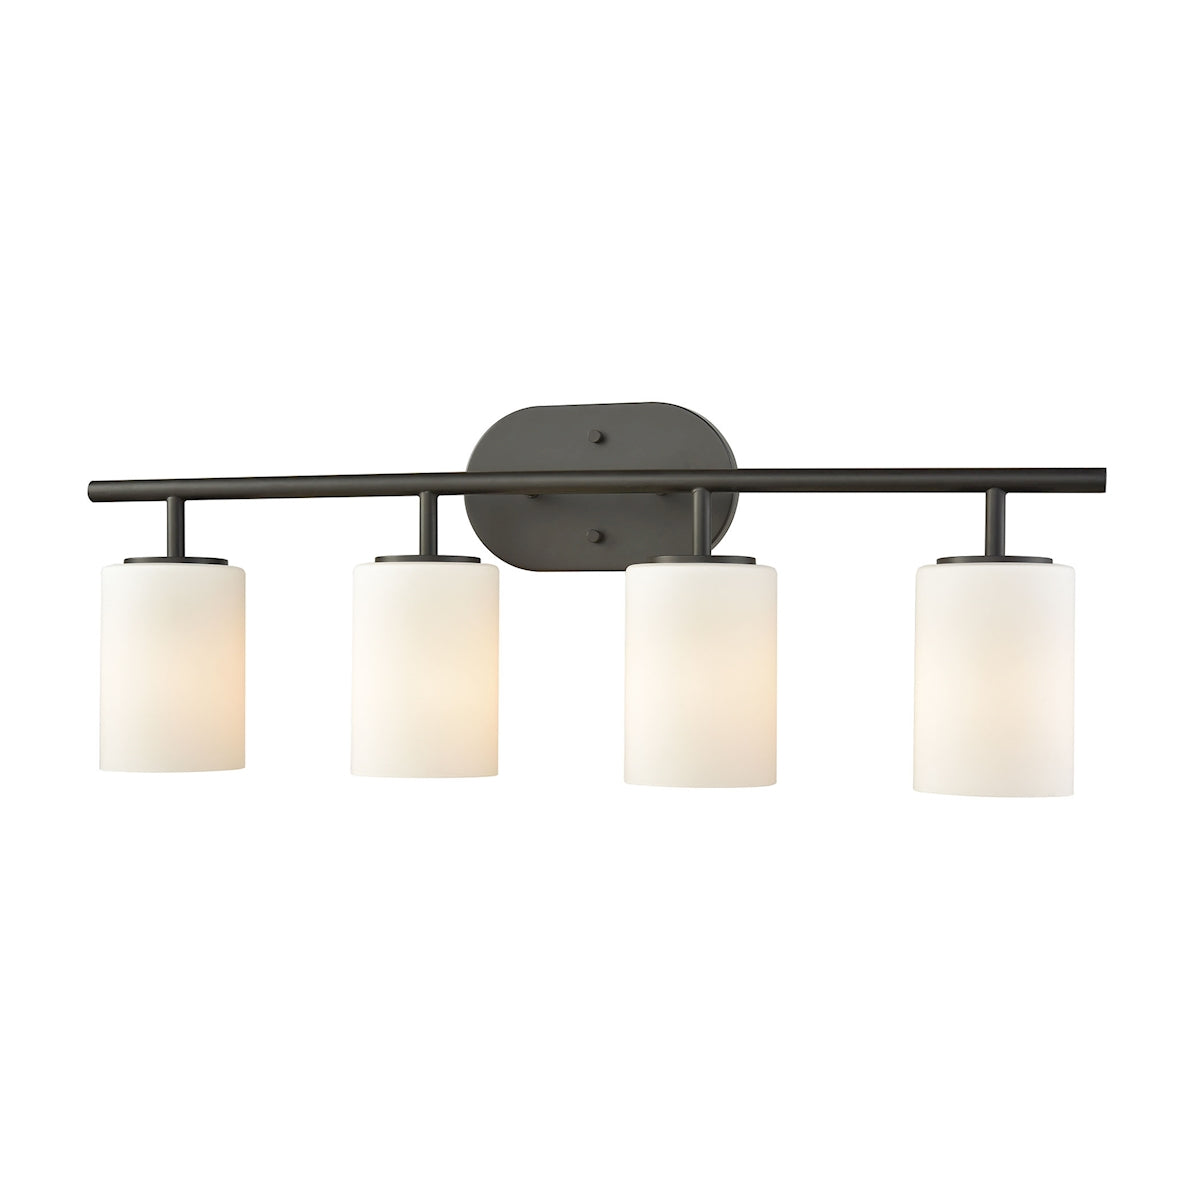 ELK Lighting 57143/4 Pemlico 4-Light Vanity Lamp in Oil Rubbed Bronze with White Glass